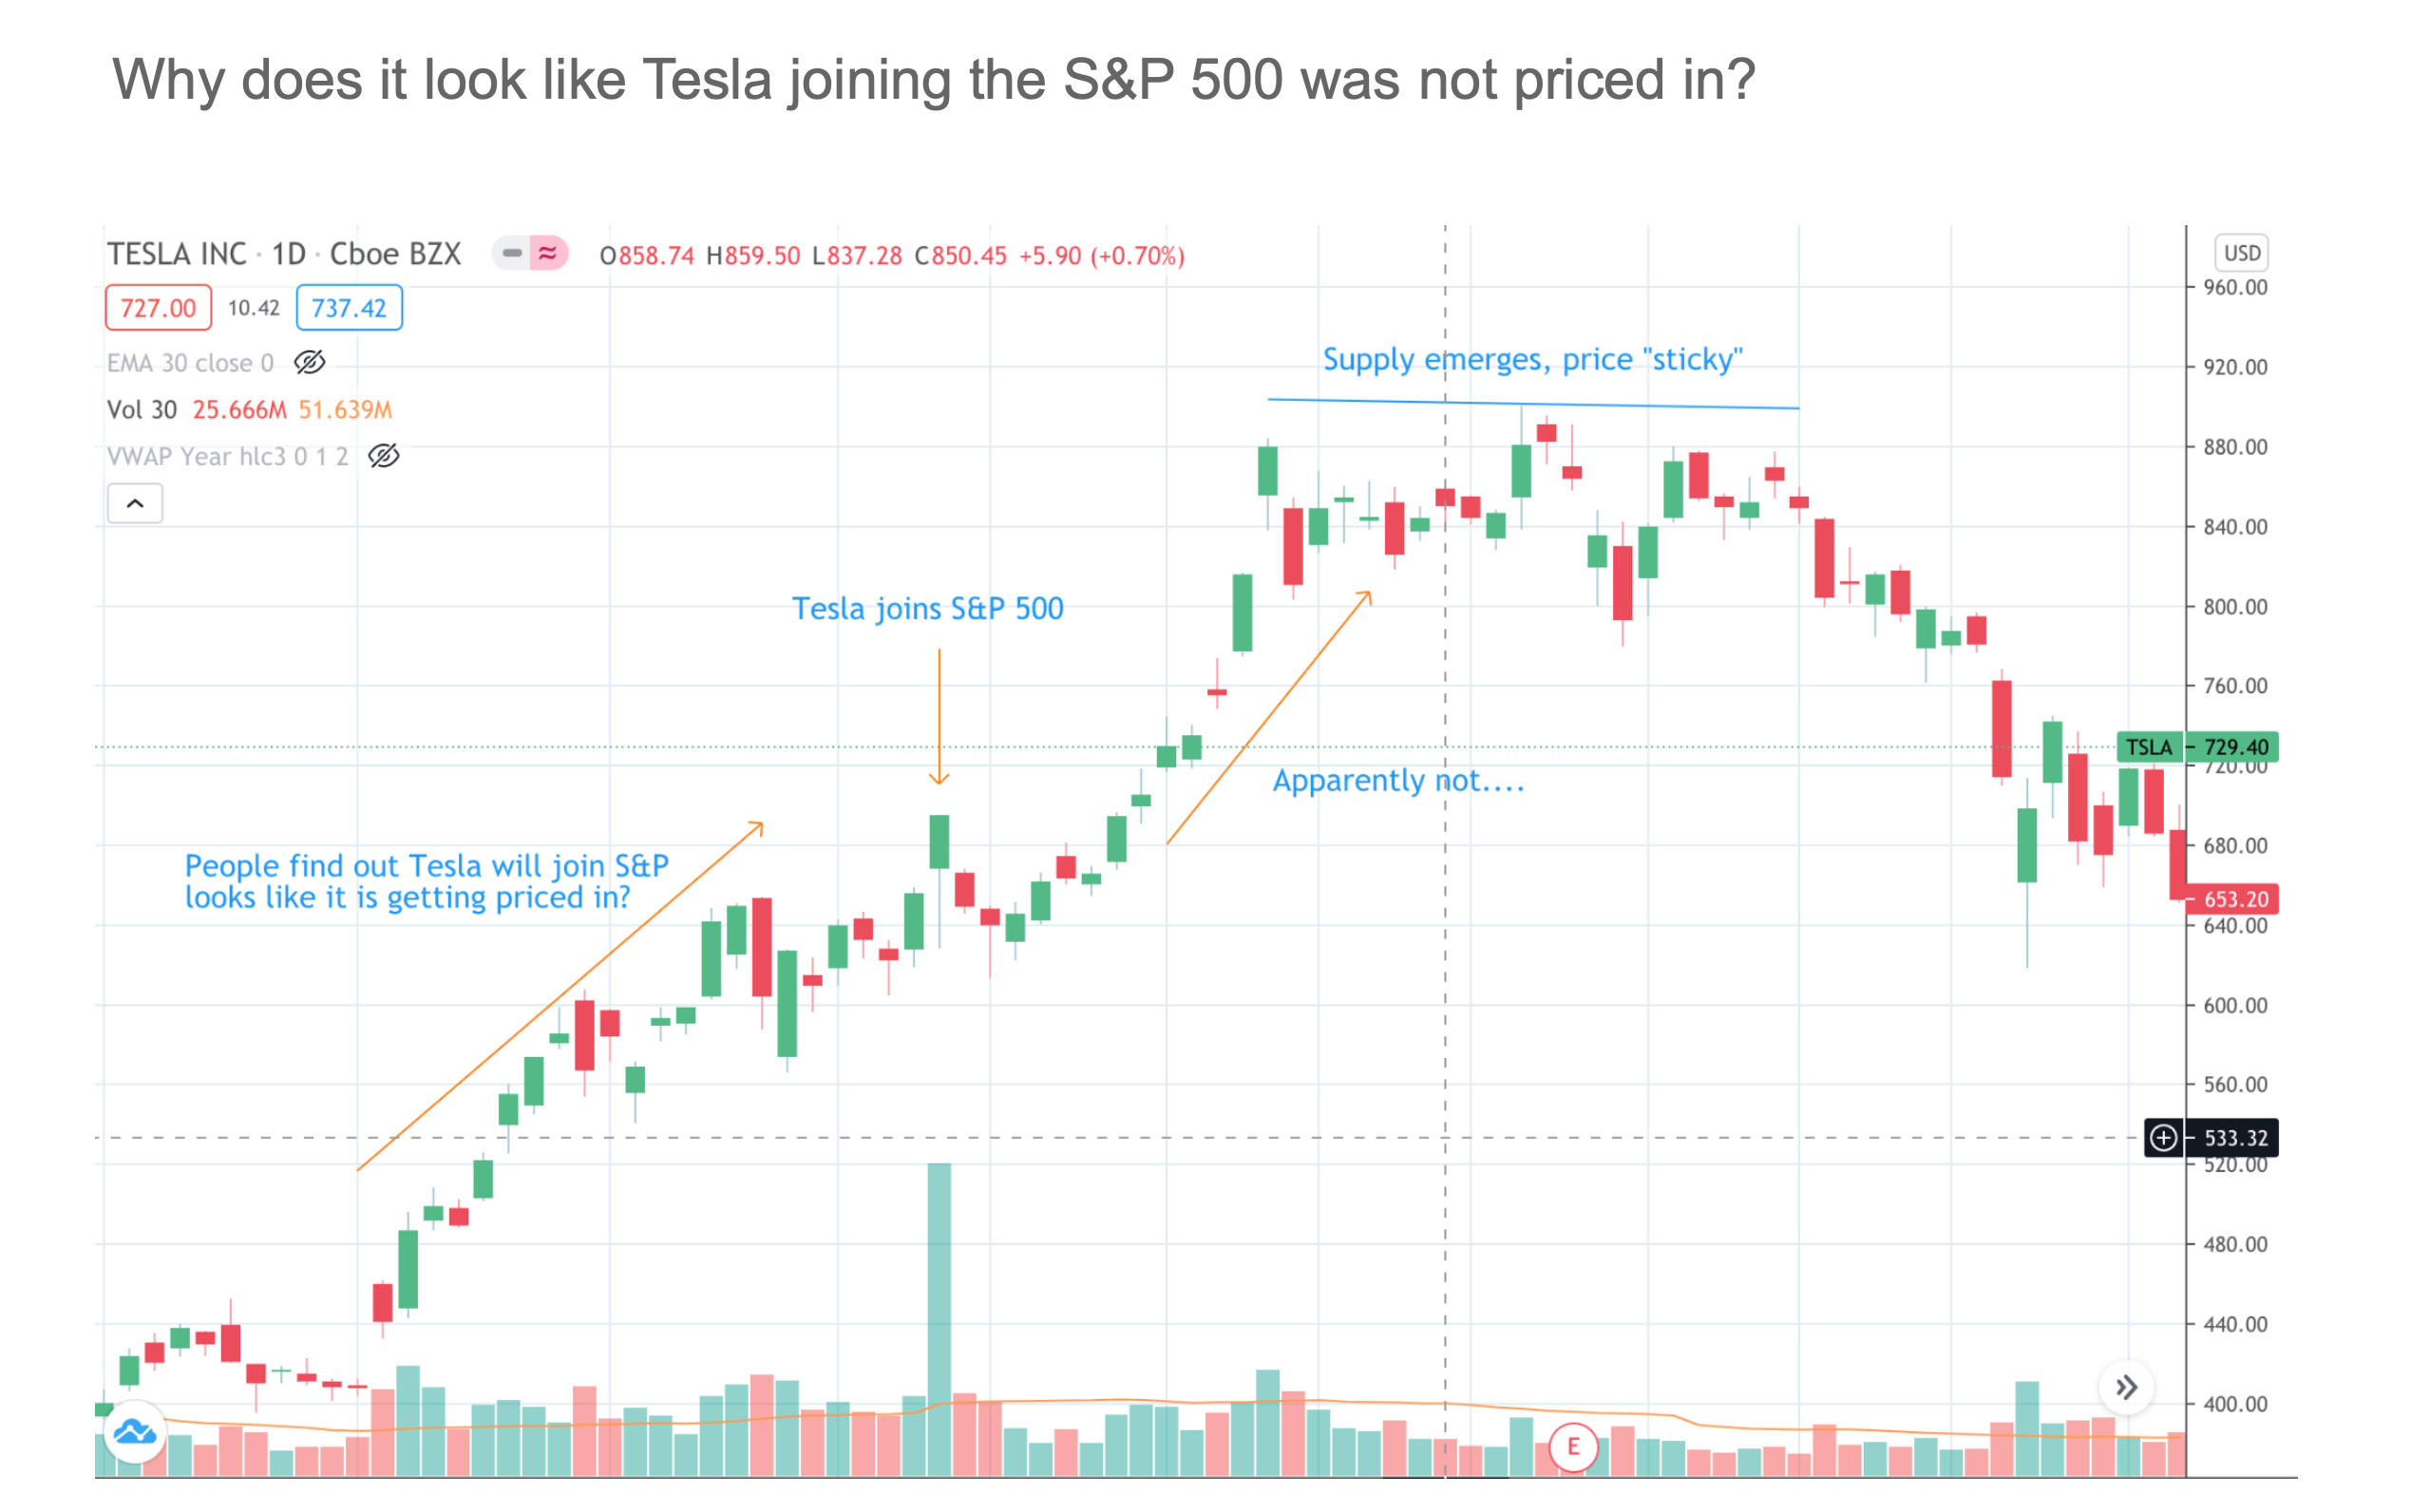 Graph of Tesla stock price pre and post joining the S&P500